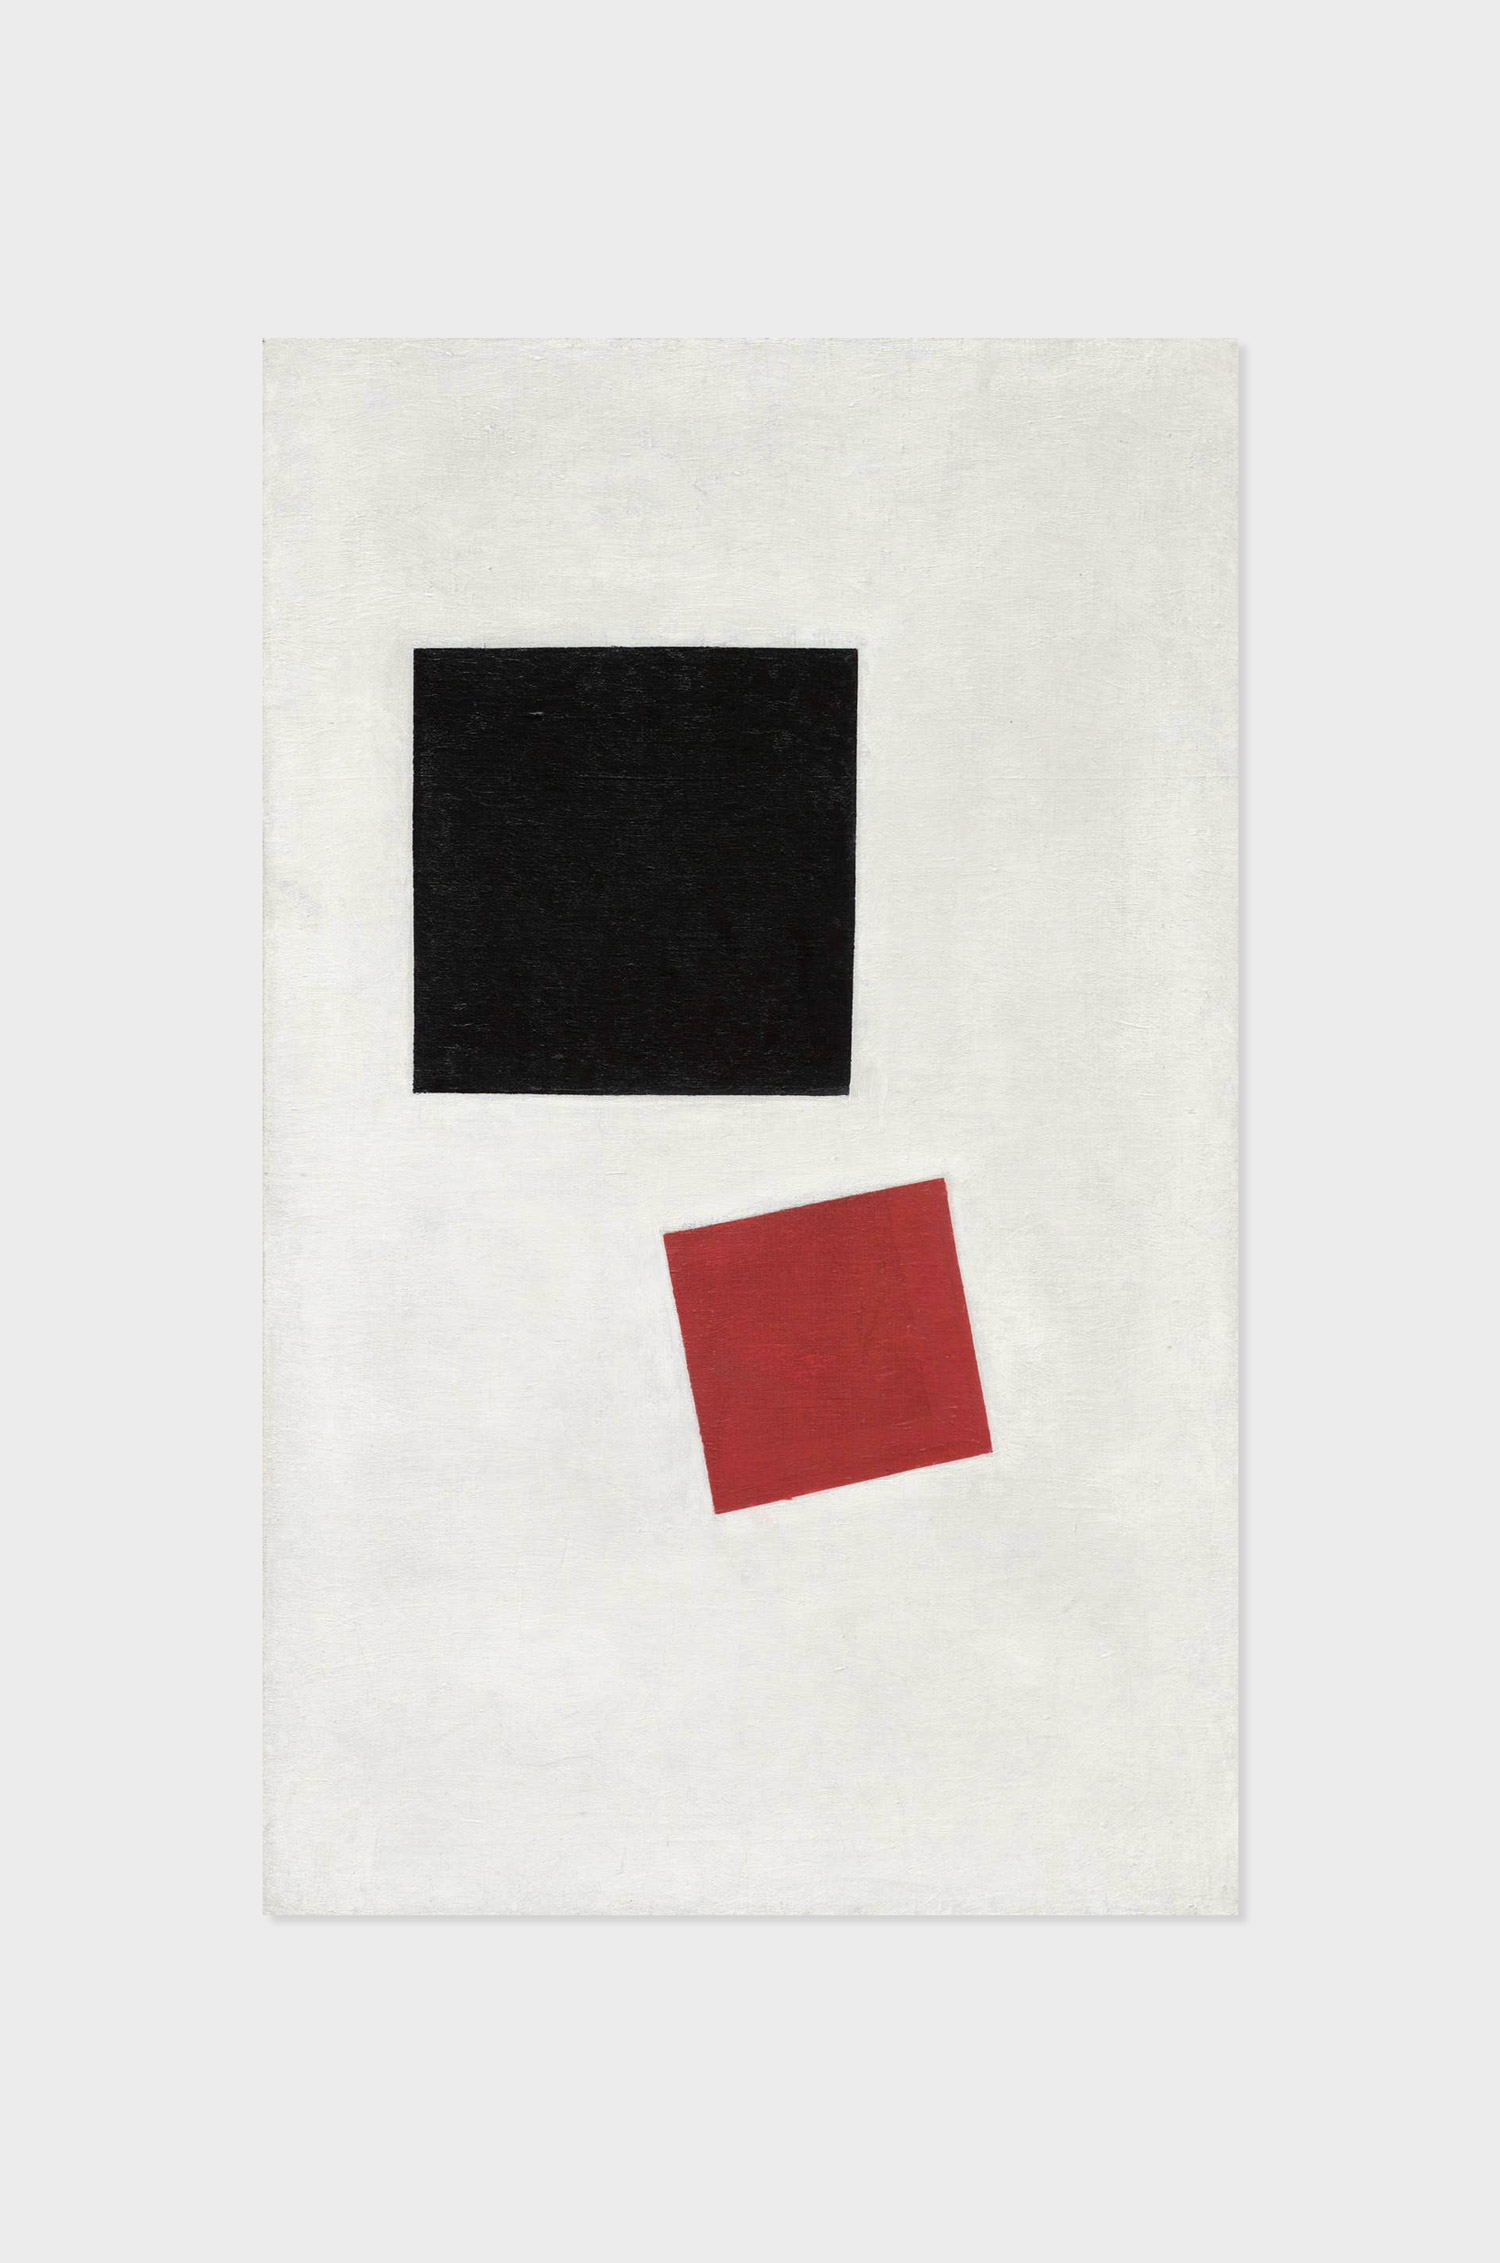 Kazimir Malevich, Black Square and Red Square, 1915, Image is in Public Domain